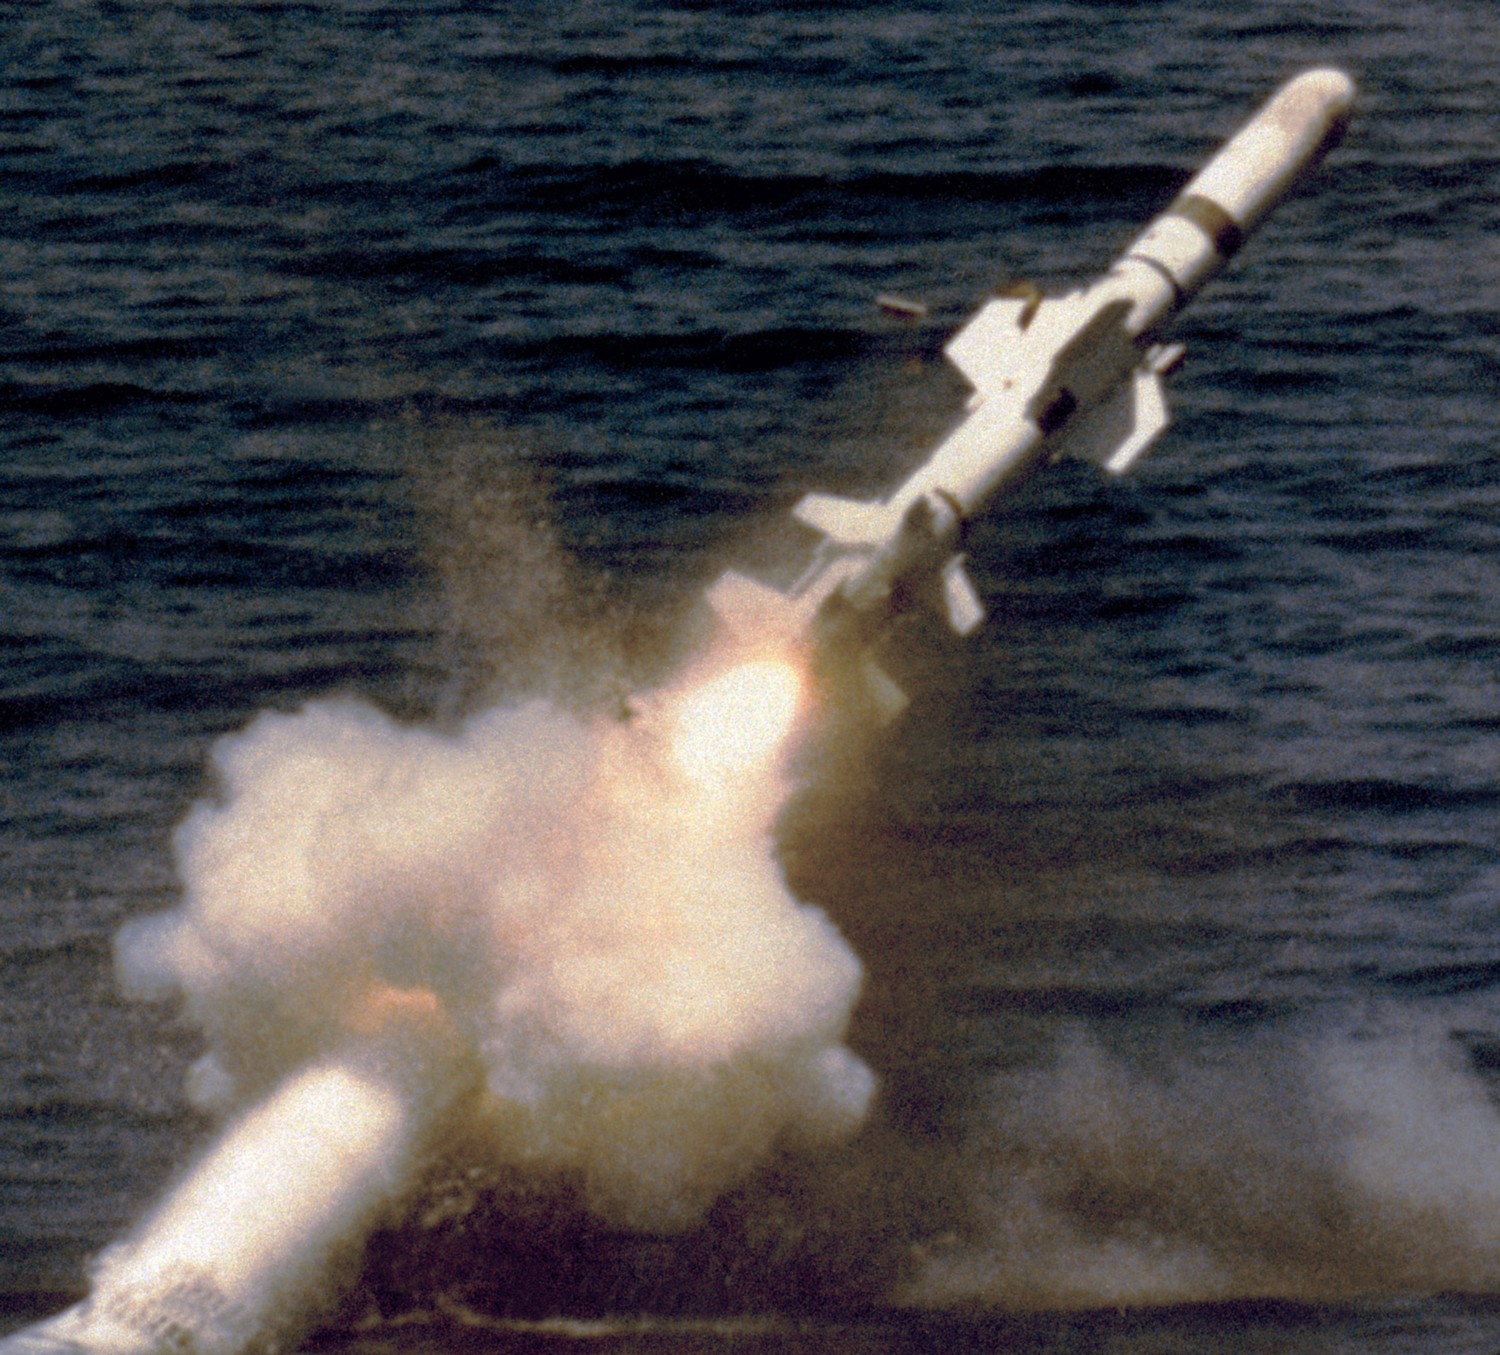 ugm-84 harpoon submarine launched anti ship missile ssm 23